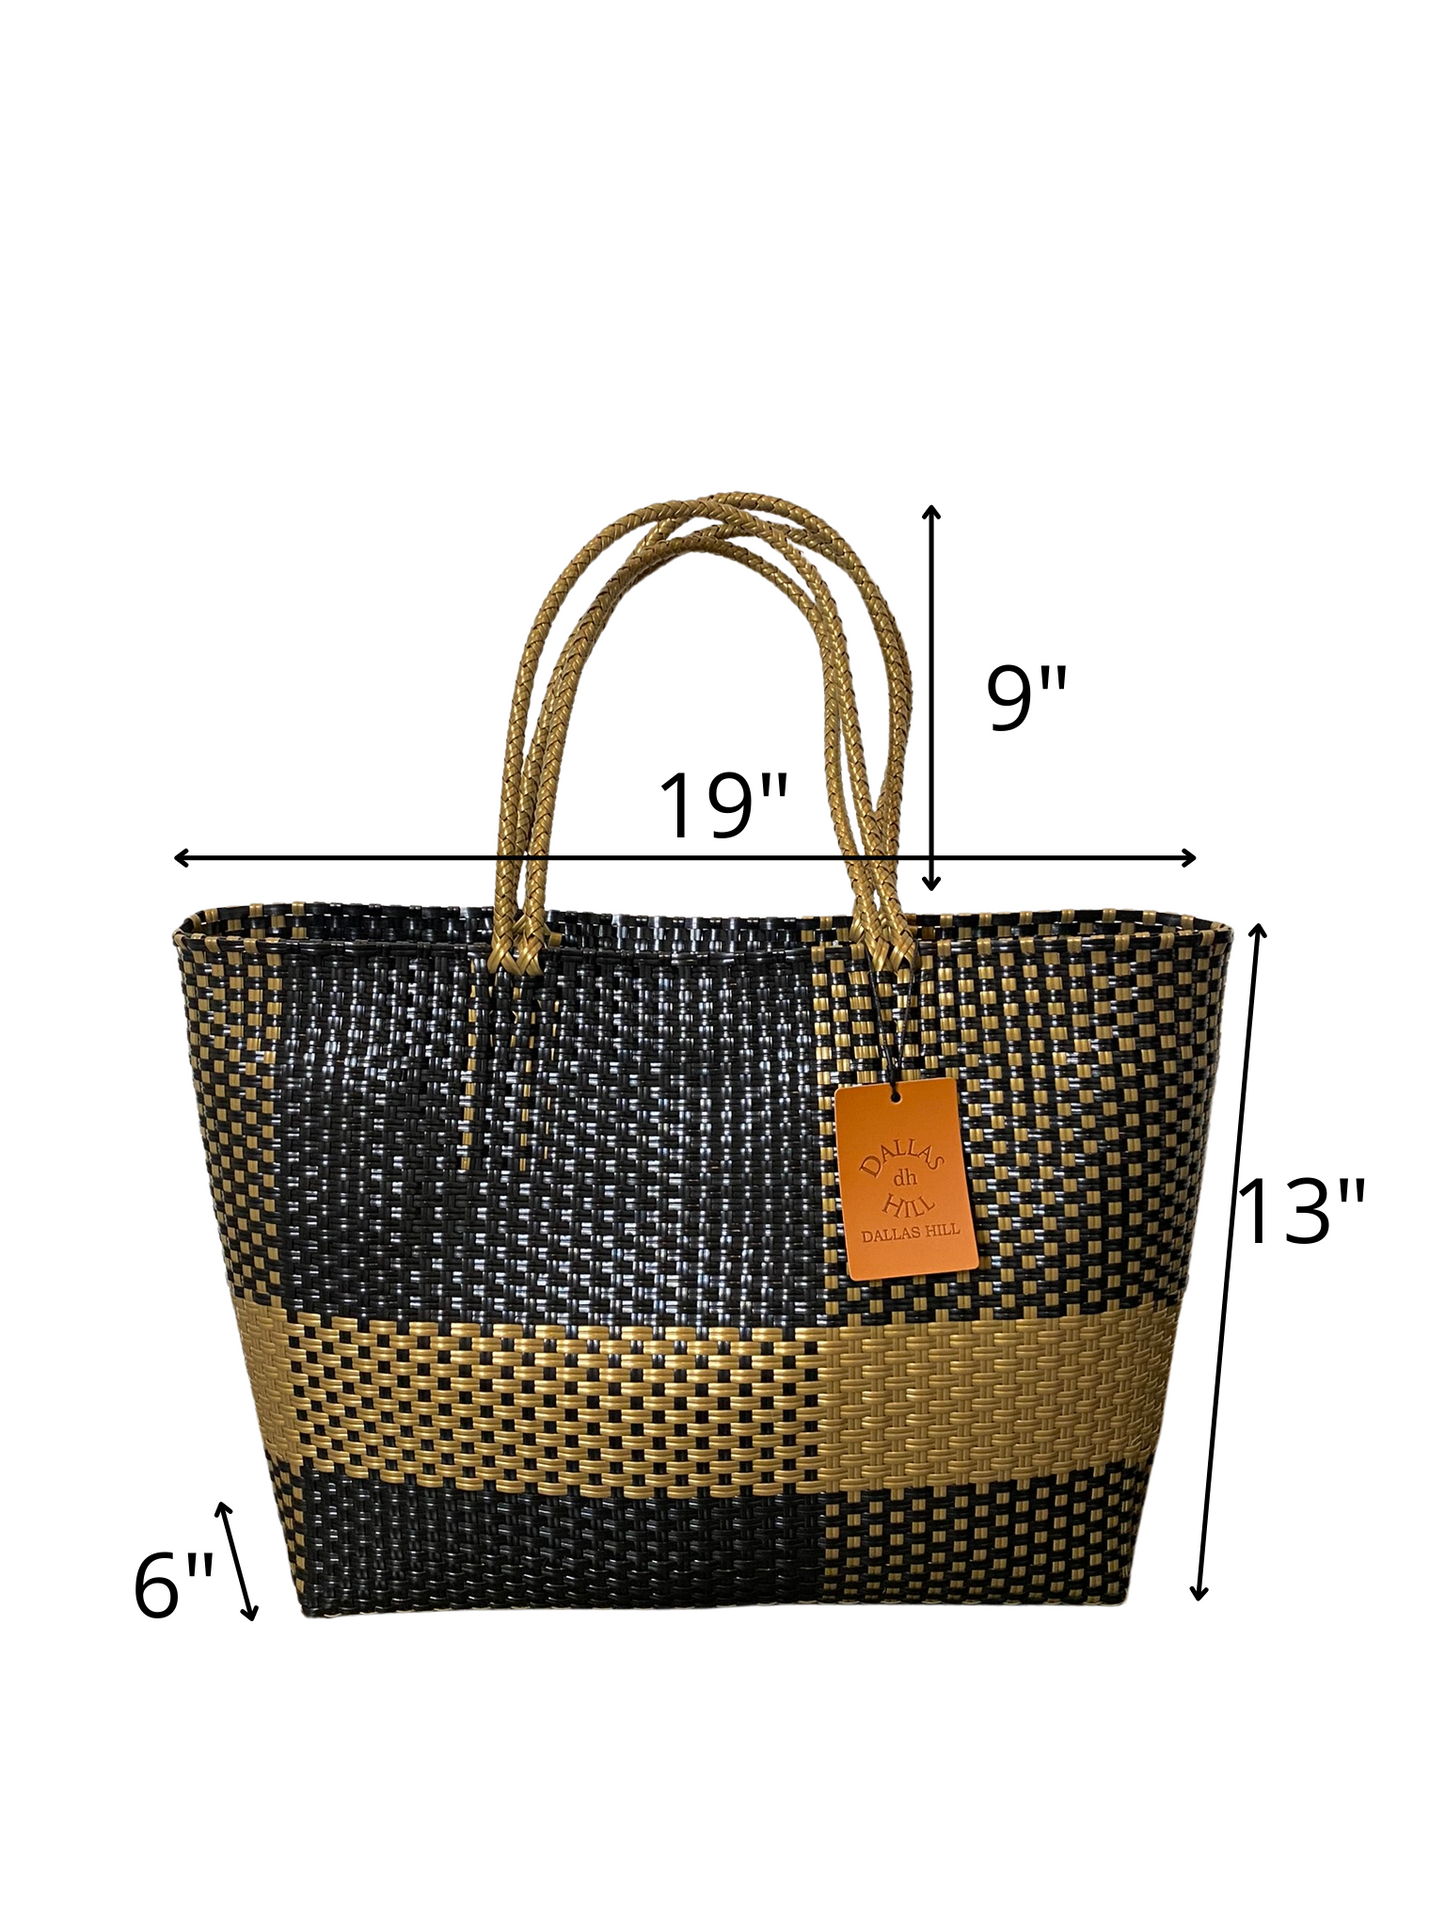 Woven Super Tote, Handwoven Recycled Plastic Tote, Woven Bag, Beach Bag, Summer Bag